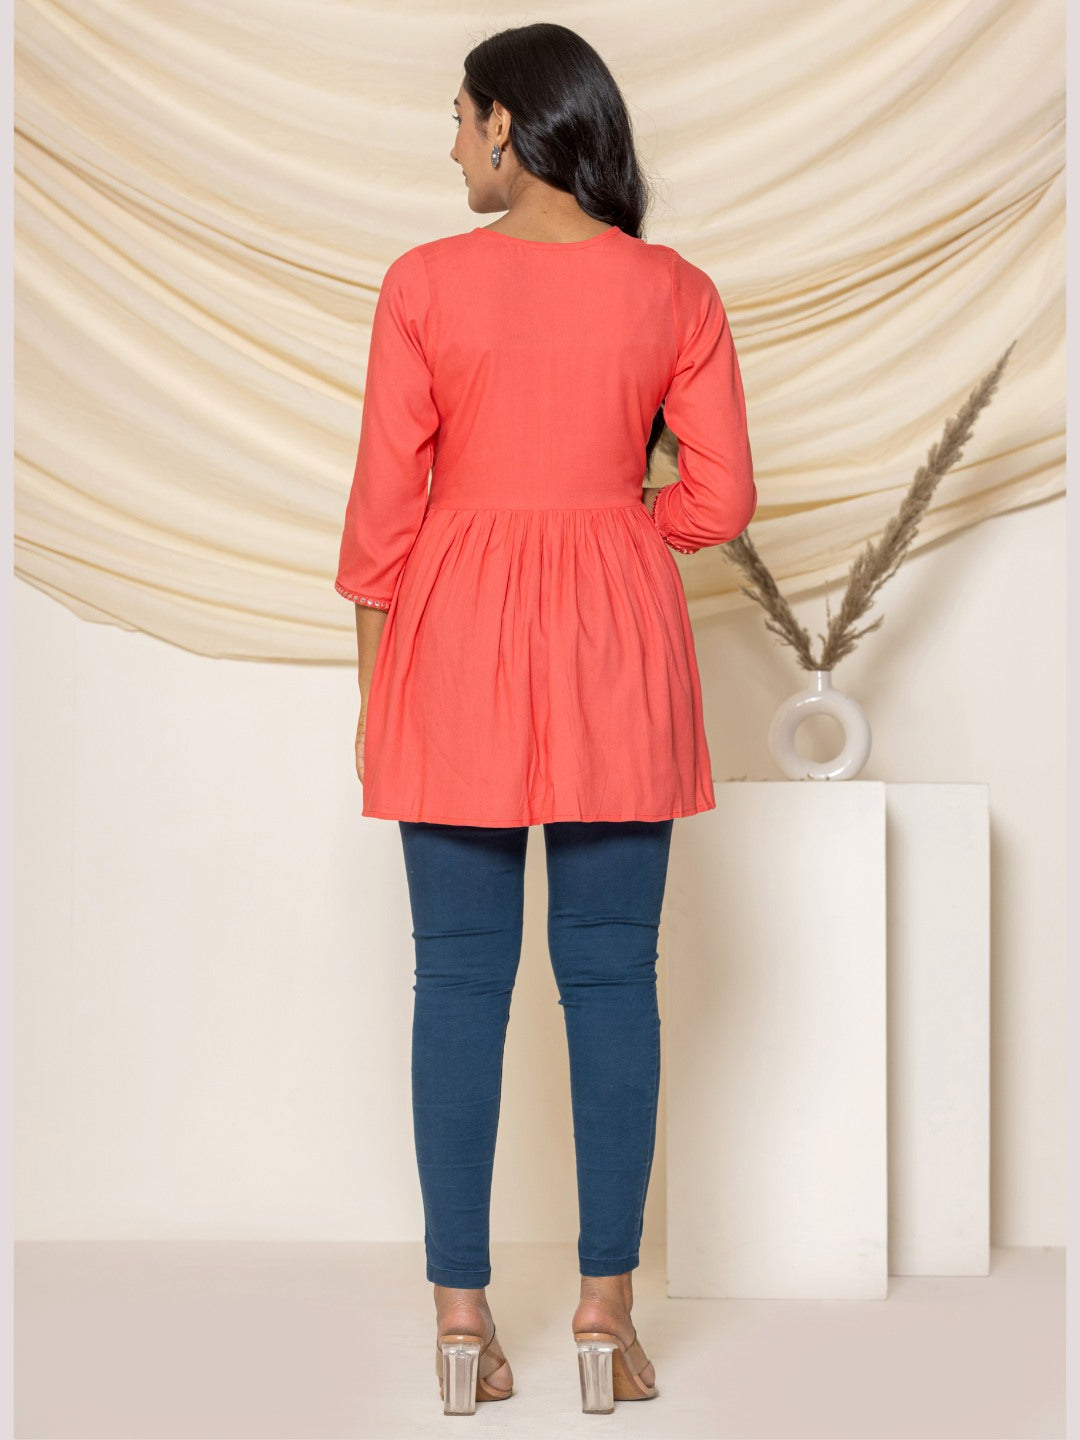 Solid Embroidered Peplum Top - Peach